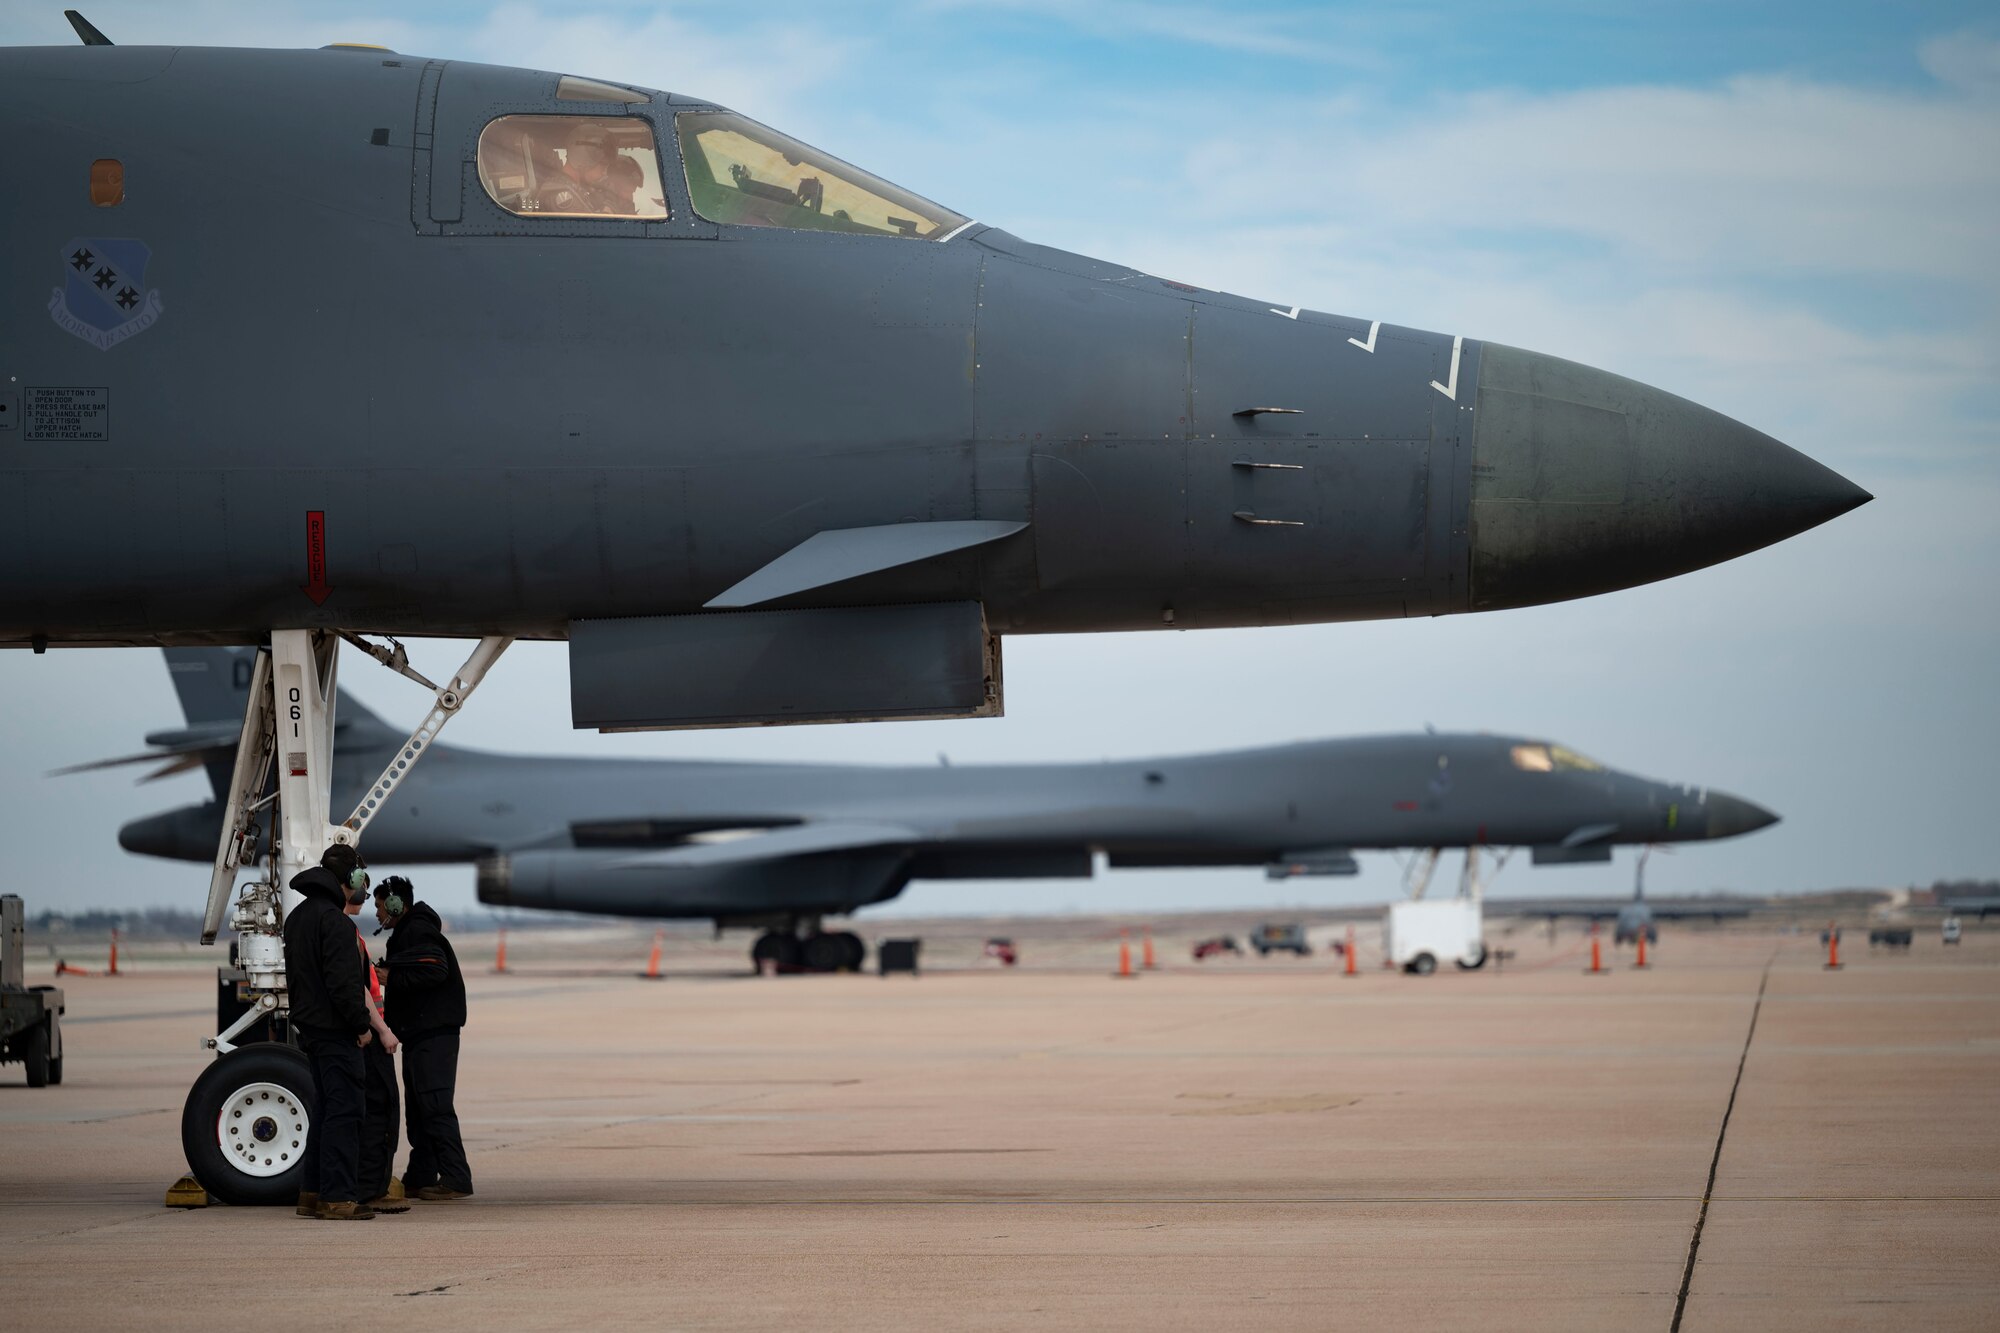 Aircrew and aircraft maintainers conduct pre-flight checks on a B-1B Lancer at Dyess Air Force Base, Texas, March 22, 2023. In preparation for possible inclement weather, Dyess Airmen rapidly prepared over a dozen aircraft to relocate, successfully demonstrating America’s Lift and Strike Base’s ability to achieve dynamic force employment while using agile combat employment. The B-1s were temporarily relocated to Holloman Air Force Base, New Mexico, while the C-130s flew to several airfields throughout the U.S. (U.S. Air Force photo by Airman Emma Anderson)